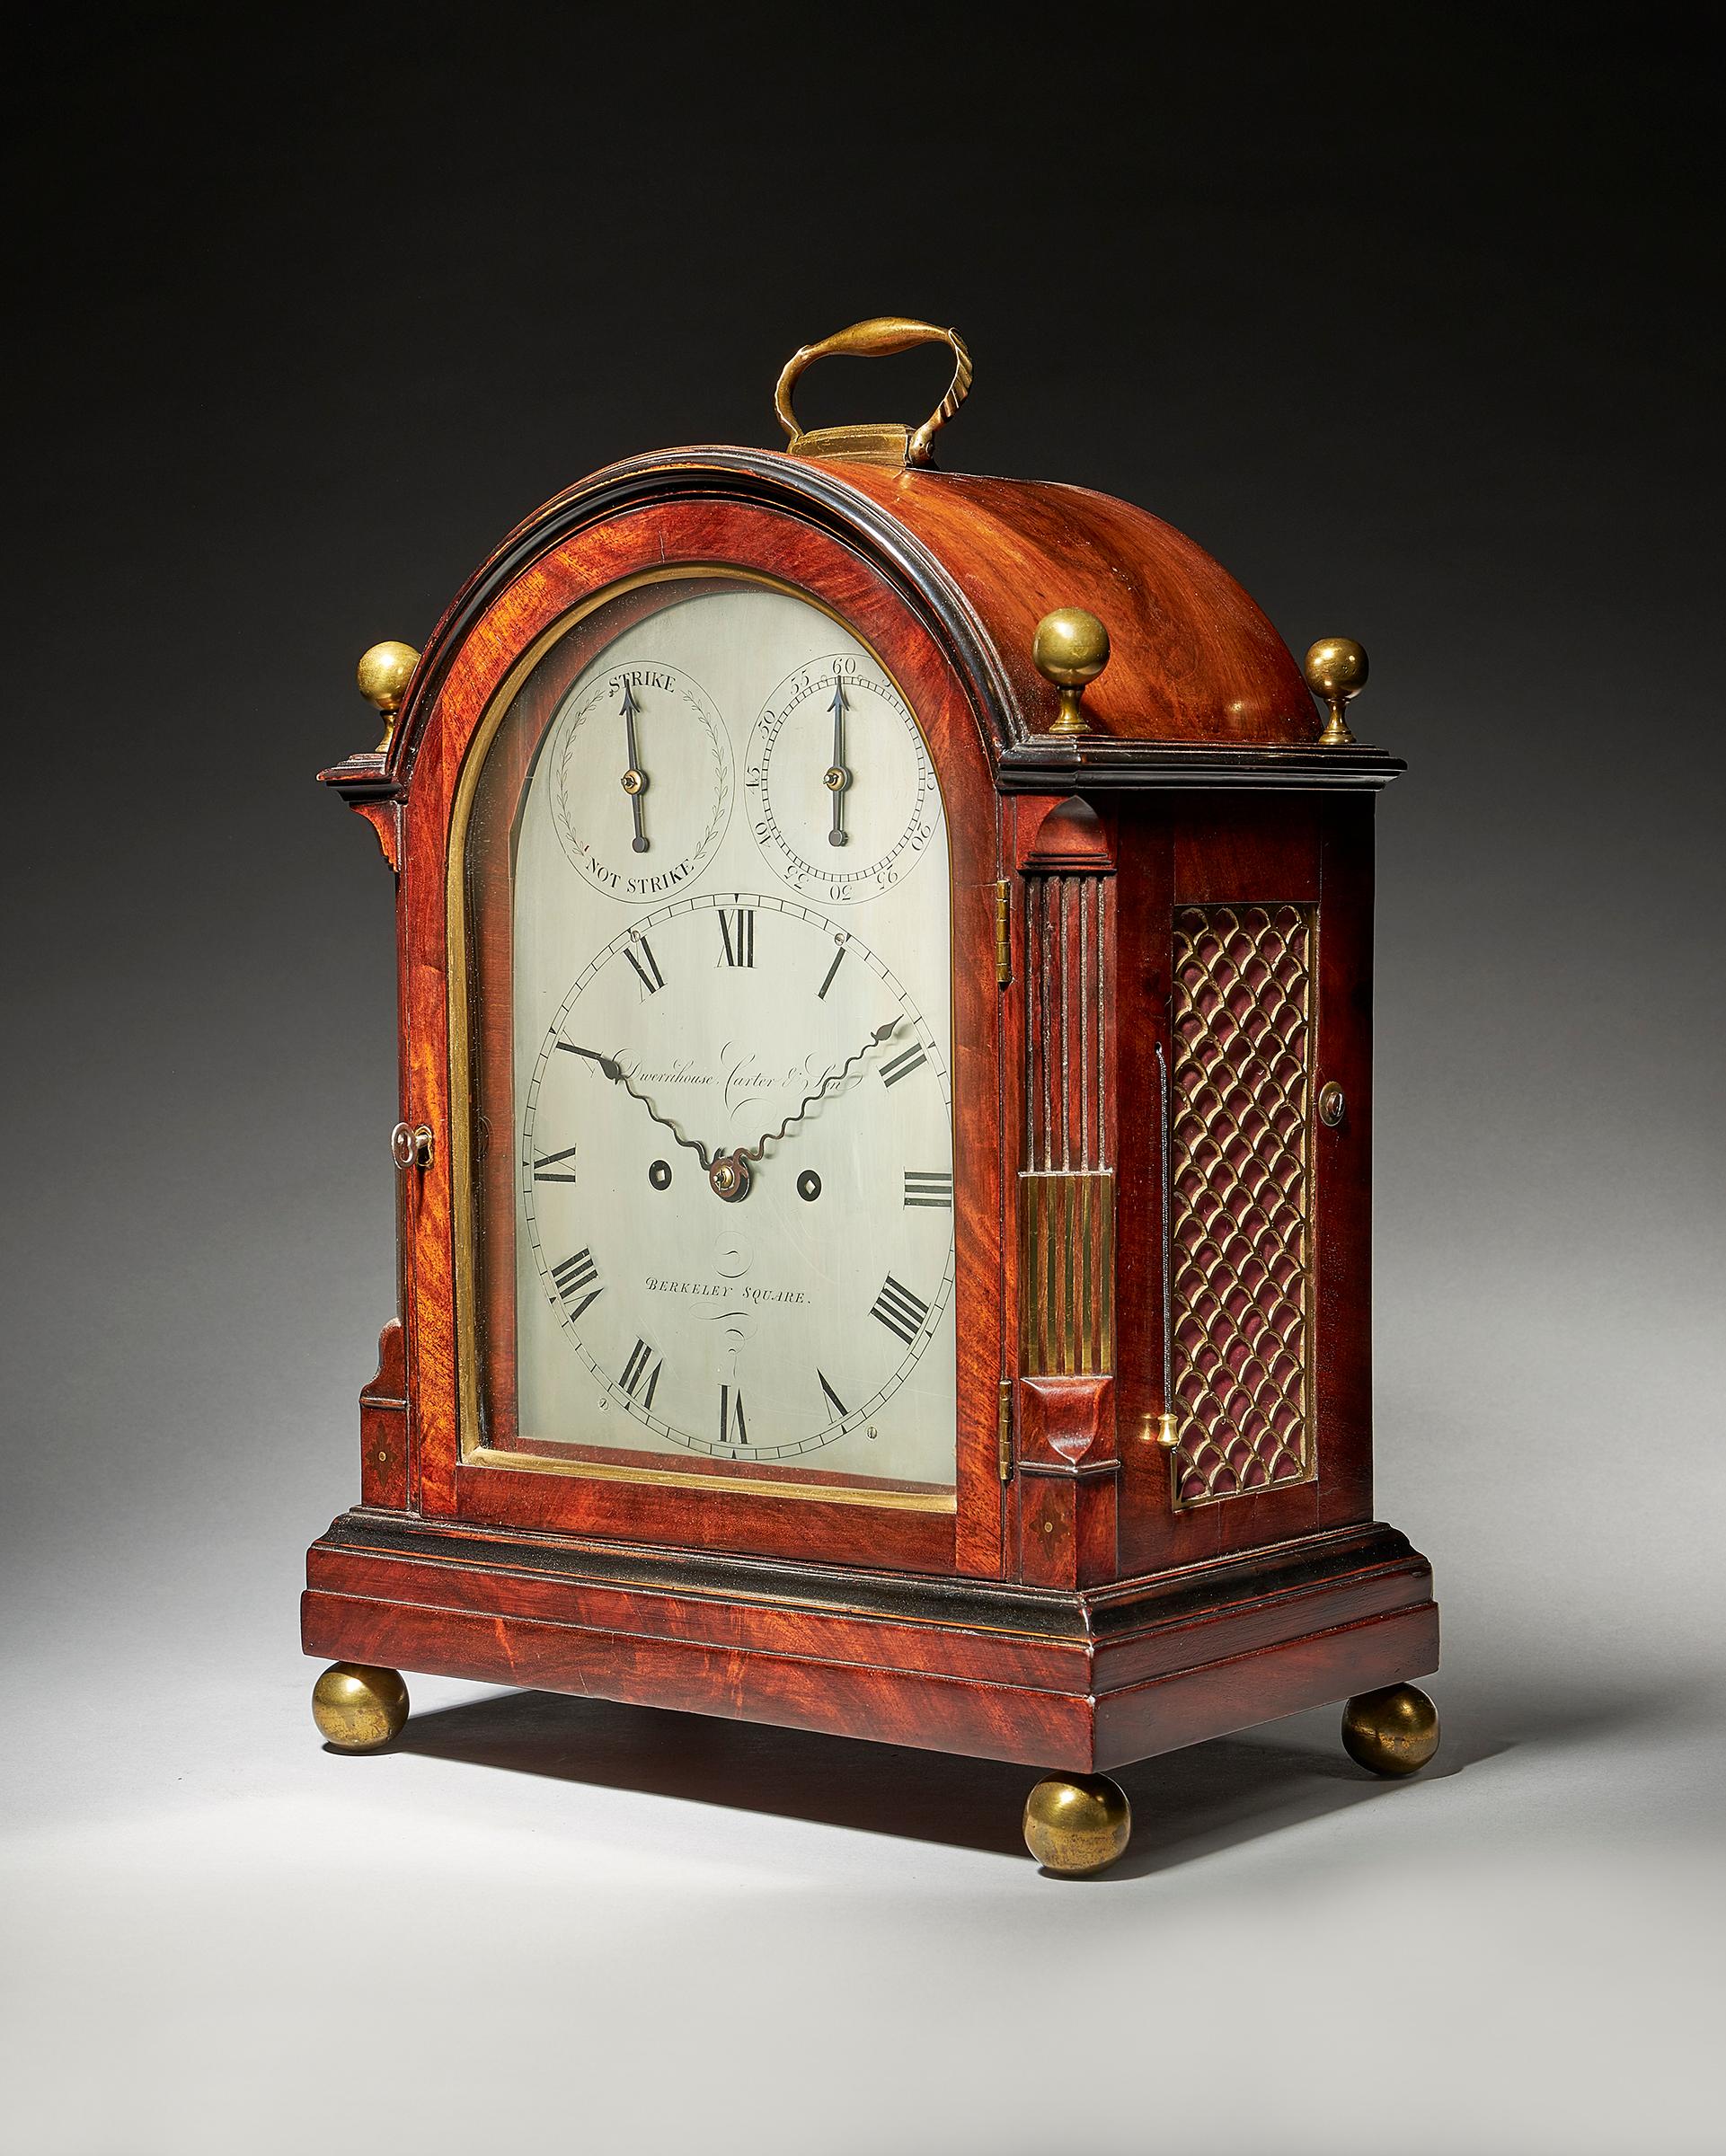 A fine George III eight-day striking mahogany bracket clock with trip repeat and silvered dial, by Dwerrihouse Carter & Son of Berkeley Square London, circa 1808-1815.
 
The eight-day twin fuse movement with trip repeat mechanism strikes on a bell